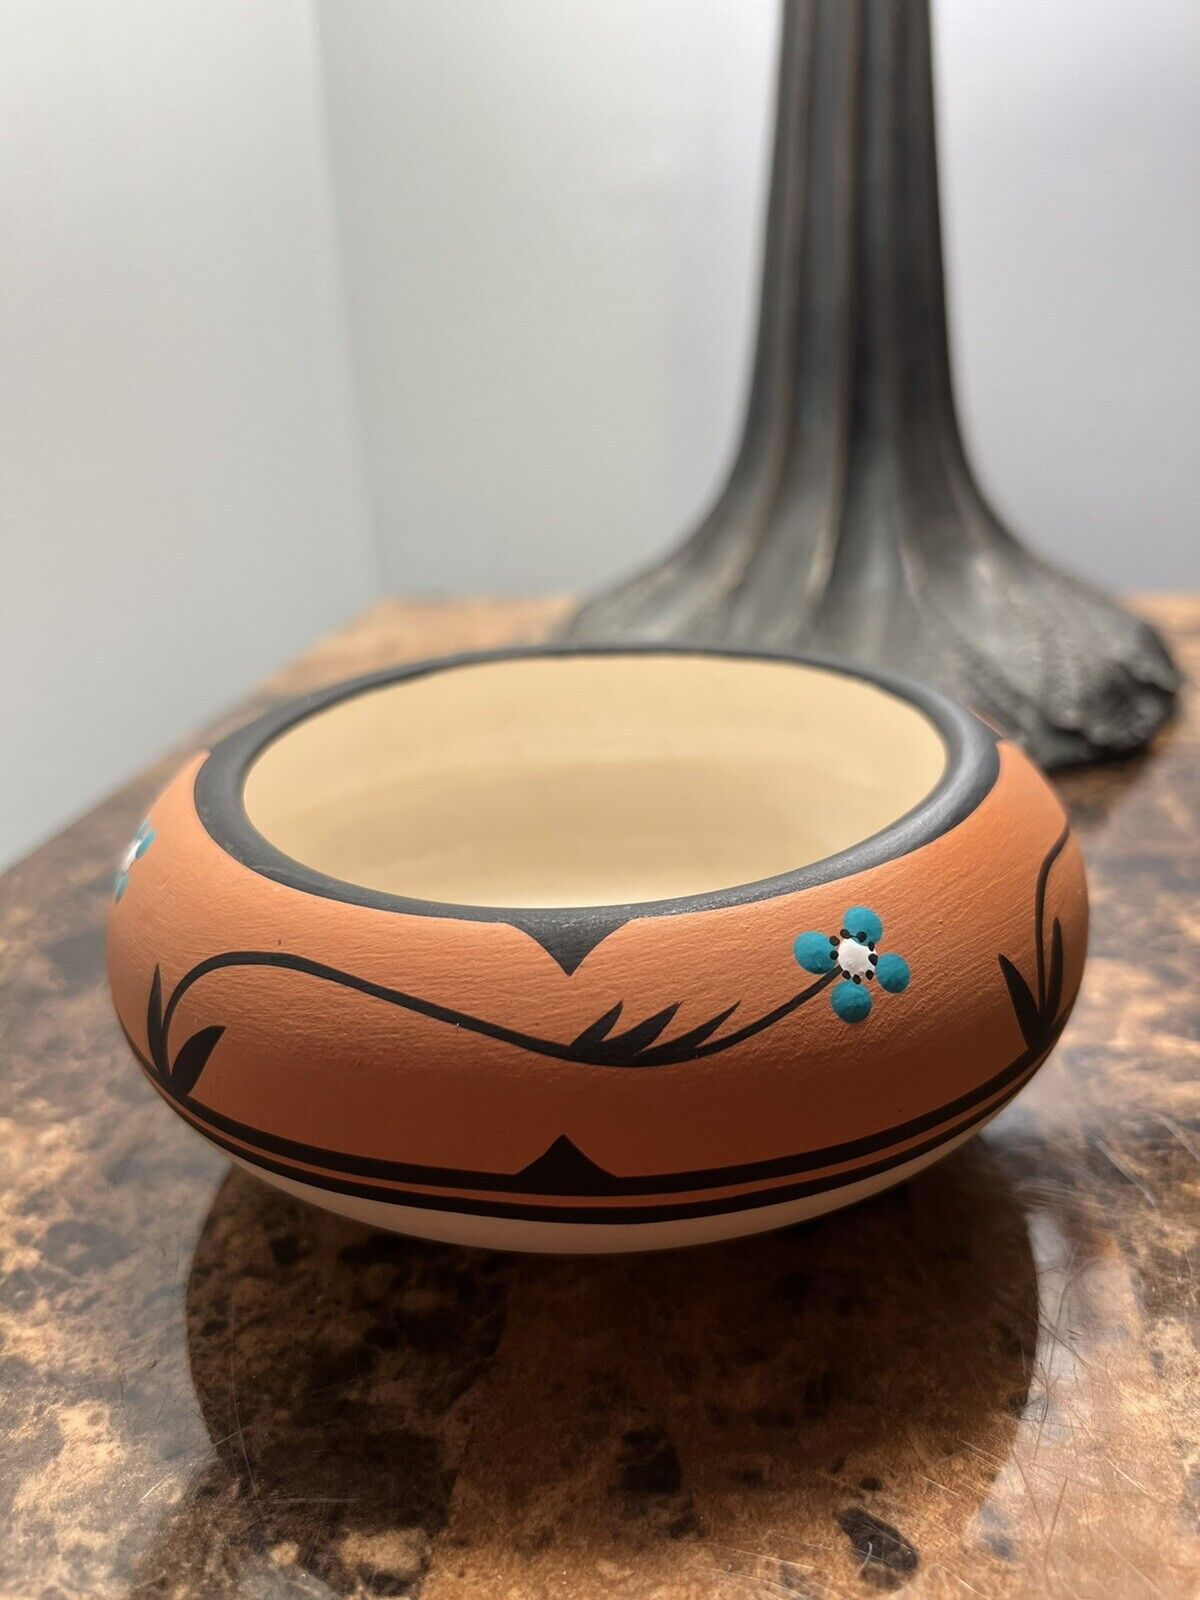 Kopa Pottery, Bowl Made in AZ, Southwest, Handpainted, Signed & Numbered DS 110.